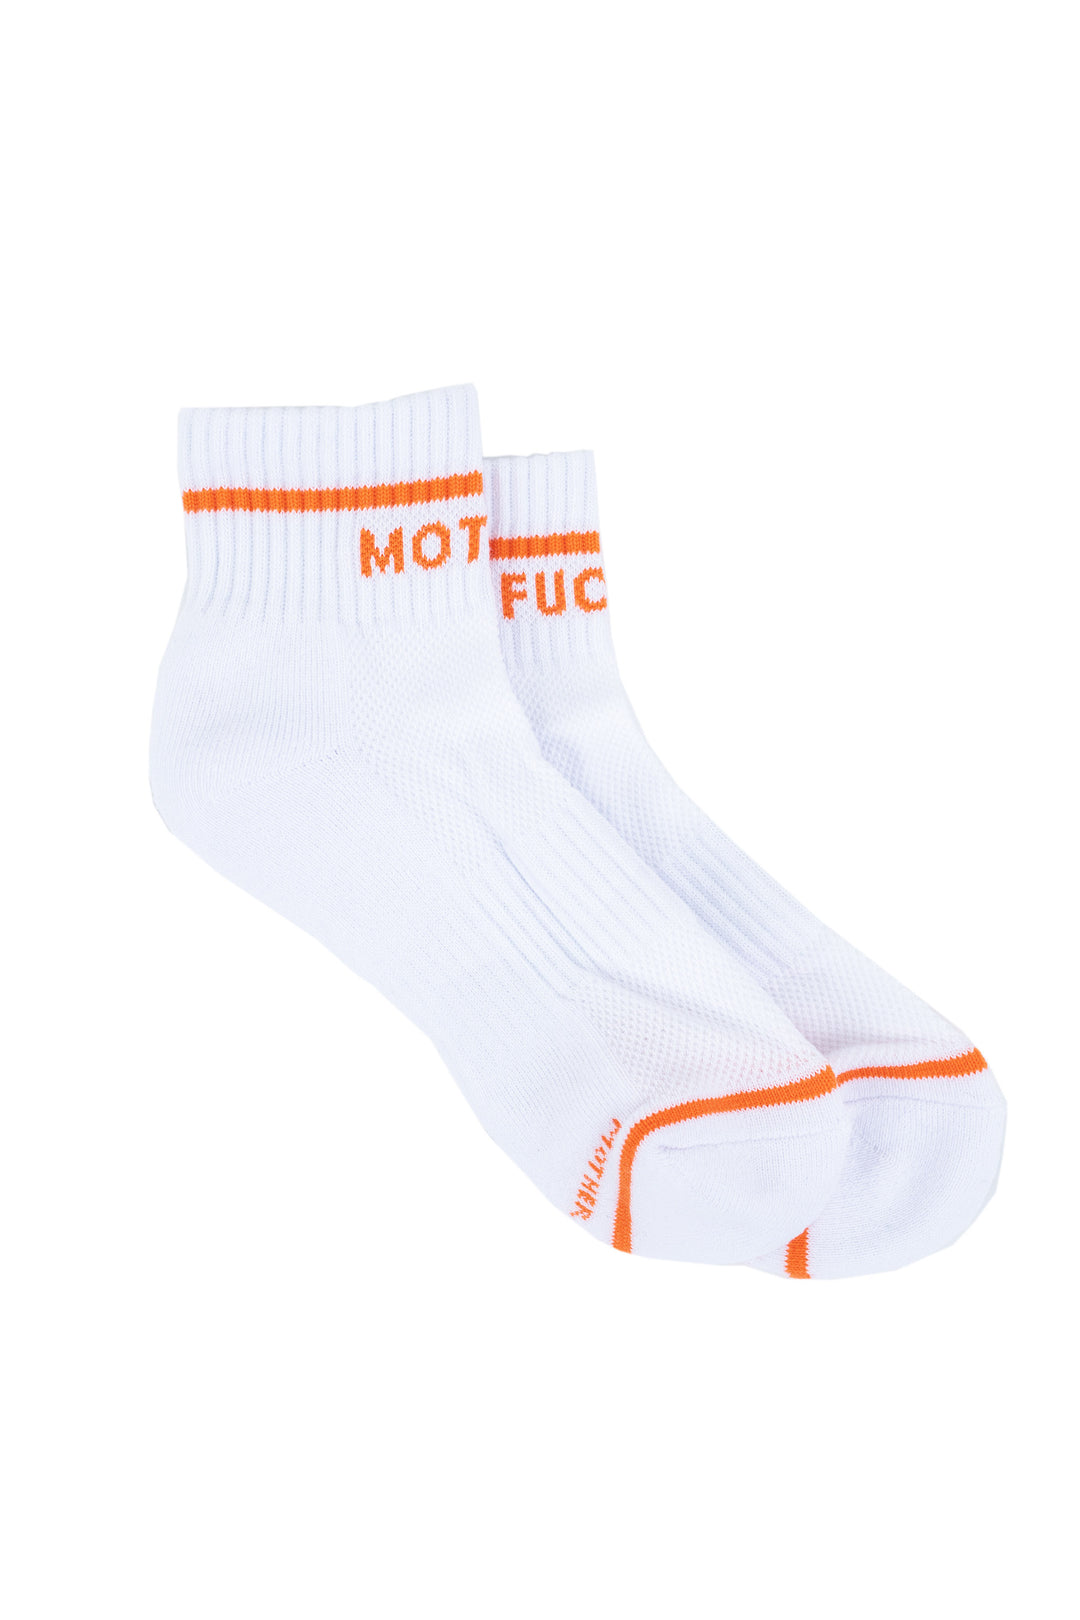 Mother - Baby Steps Ankle in White/Orange Mother F*cker